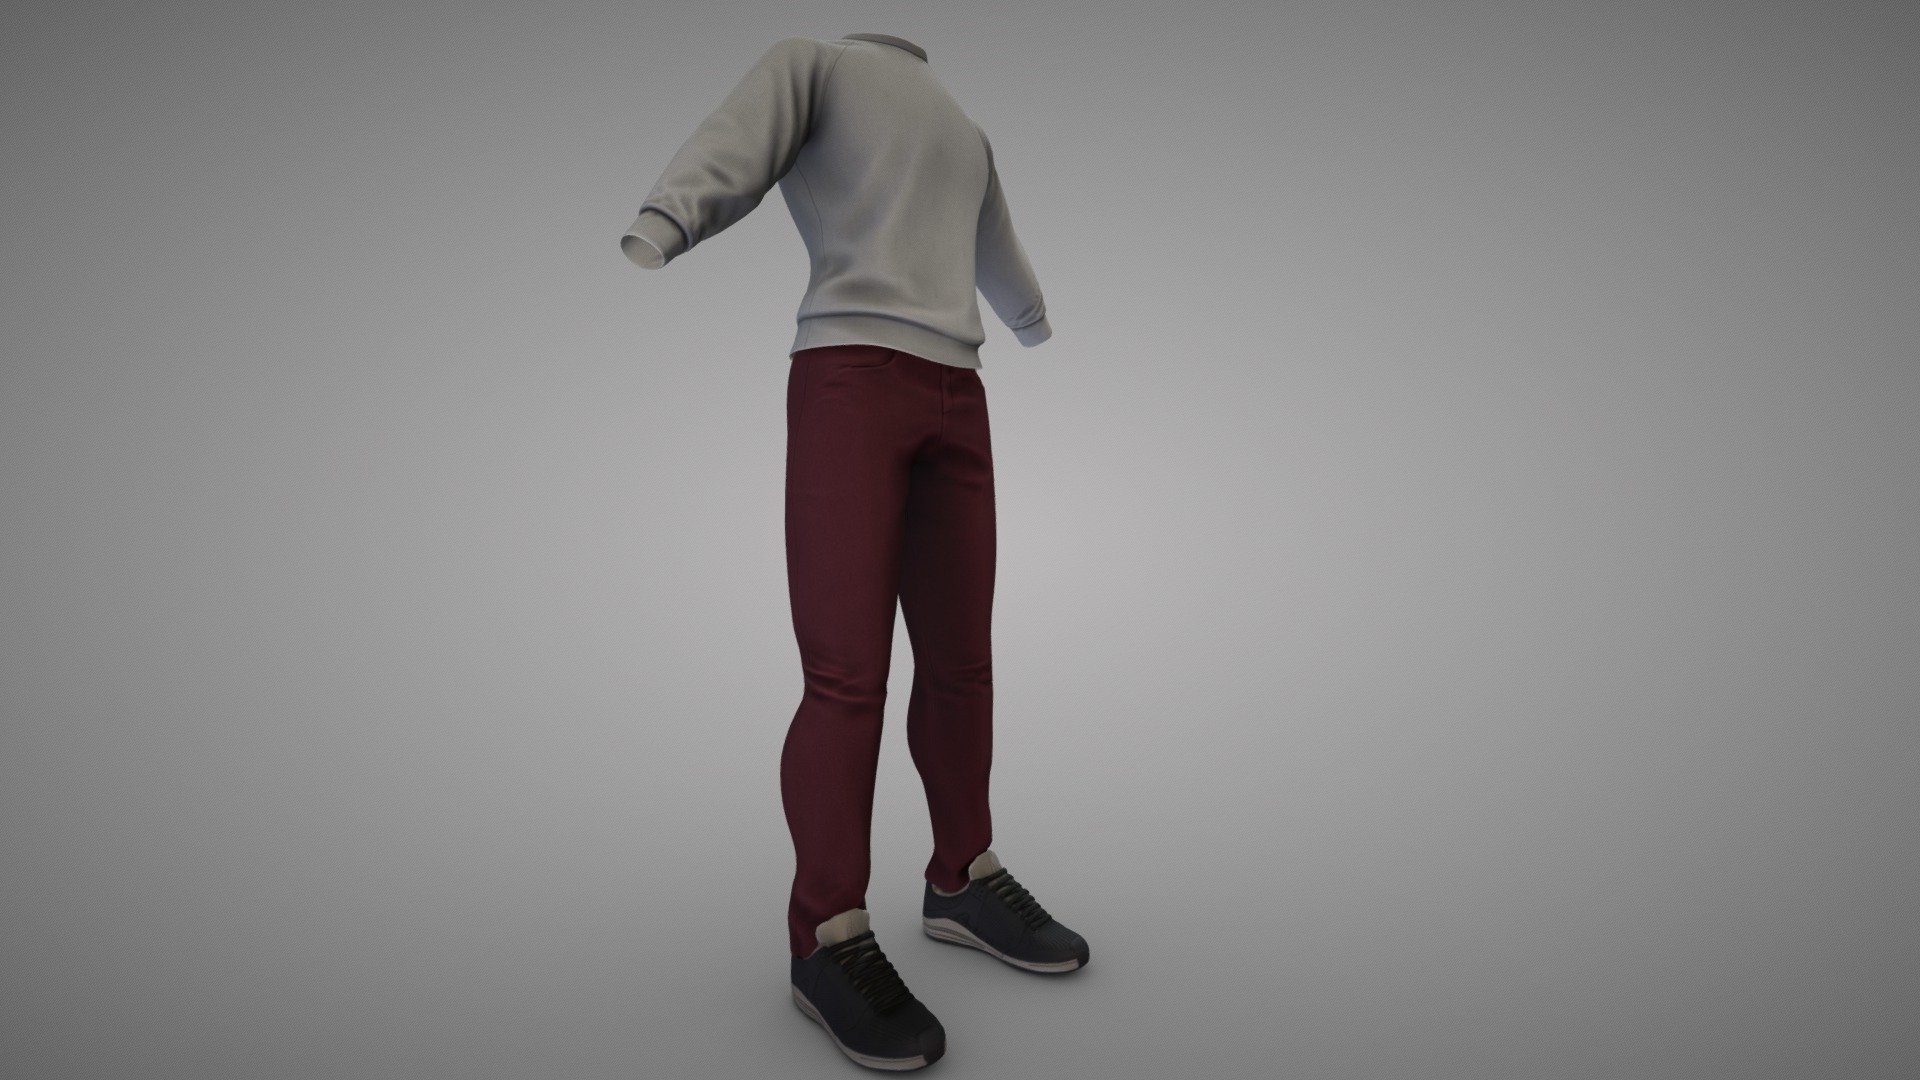 Sweater, Pants, Shoes (Separate objects)

Can fit to any character, ready for games

Quads, clean topology

No overlapping unwrapped UVs

High quality realistic textues : baked albedo, specular, normals, ao

FBX, OBJ, gITF, USDZ (request other formats)

PBR or Classic

Please ask for any other questions

Type     user:3dia &ldquo;search term